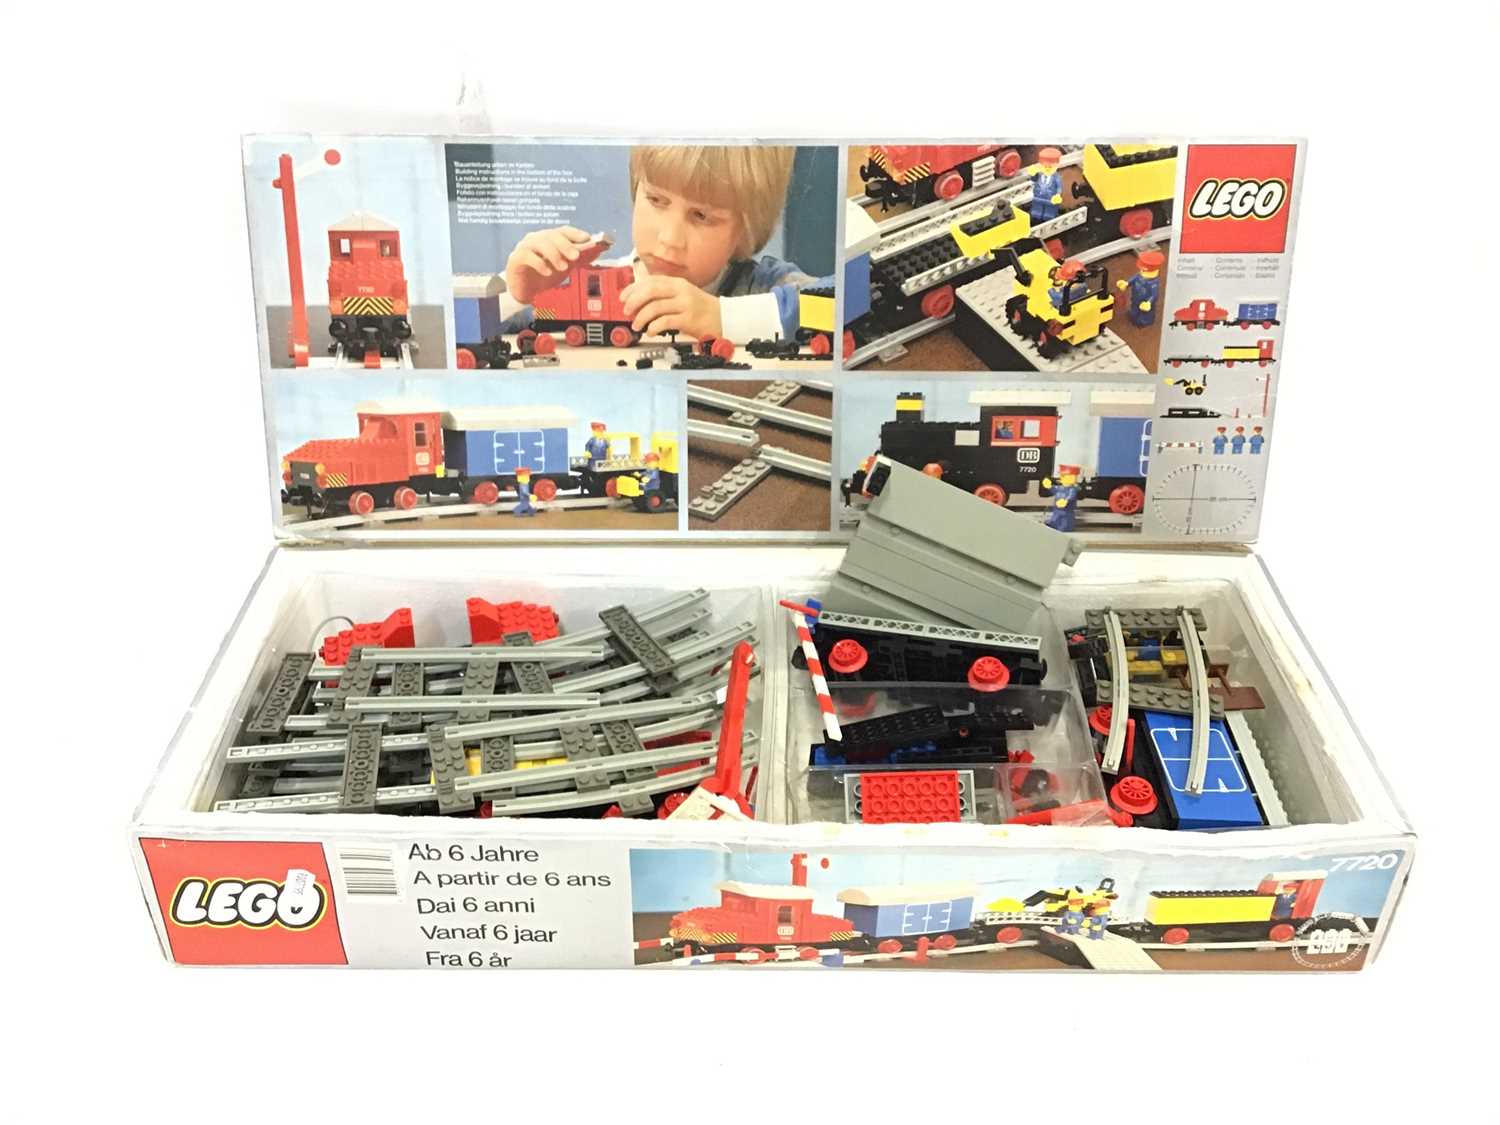 Erobring mager Es Lot 1536 - Lego Thomas and friends boxed set 5554 and